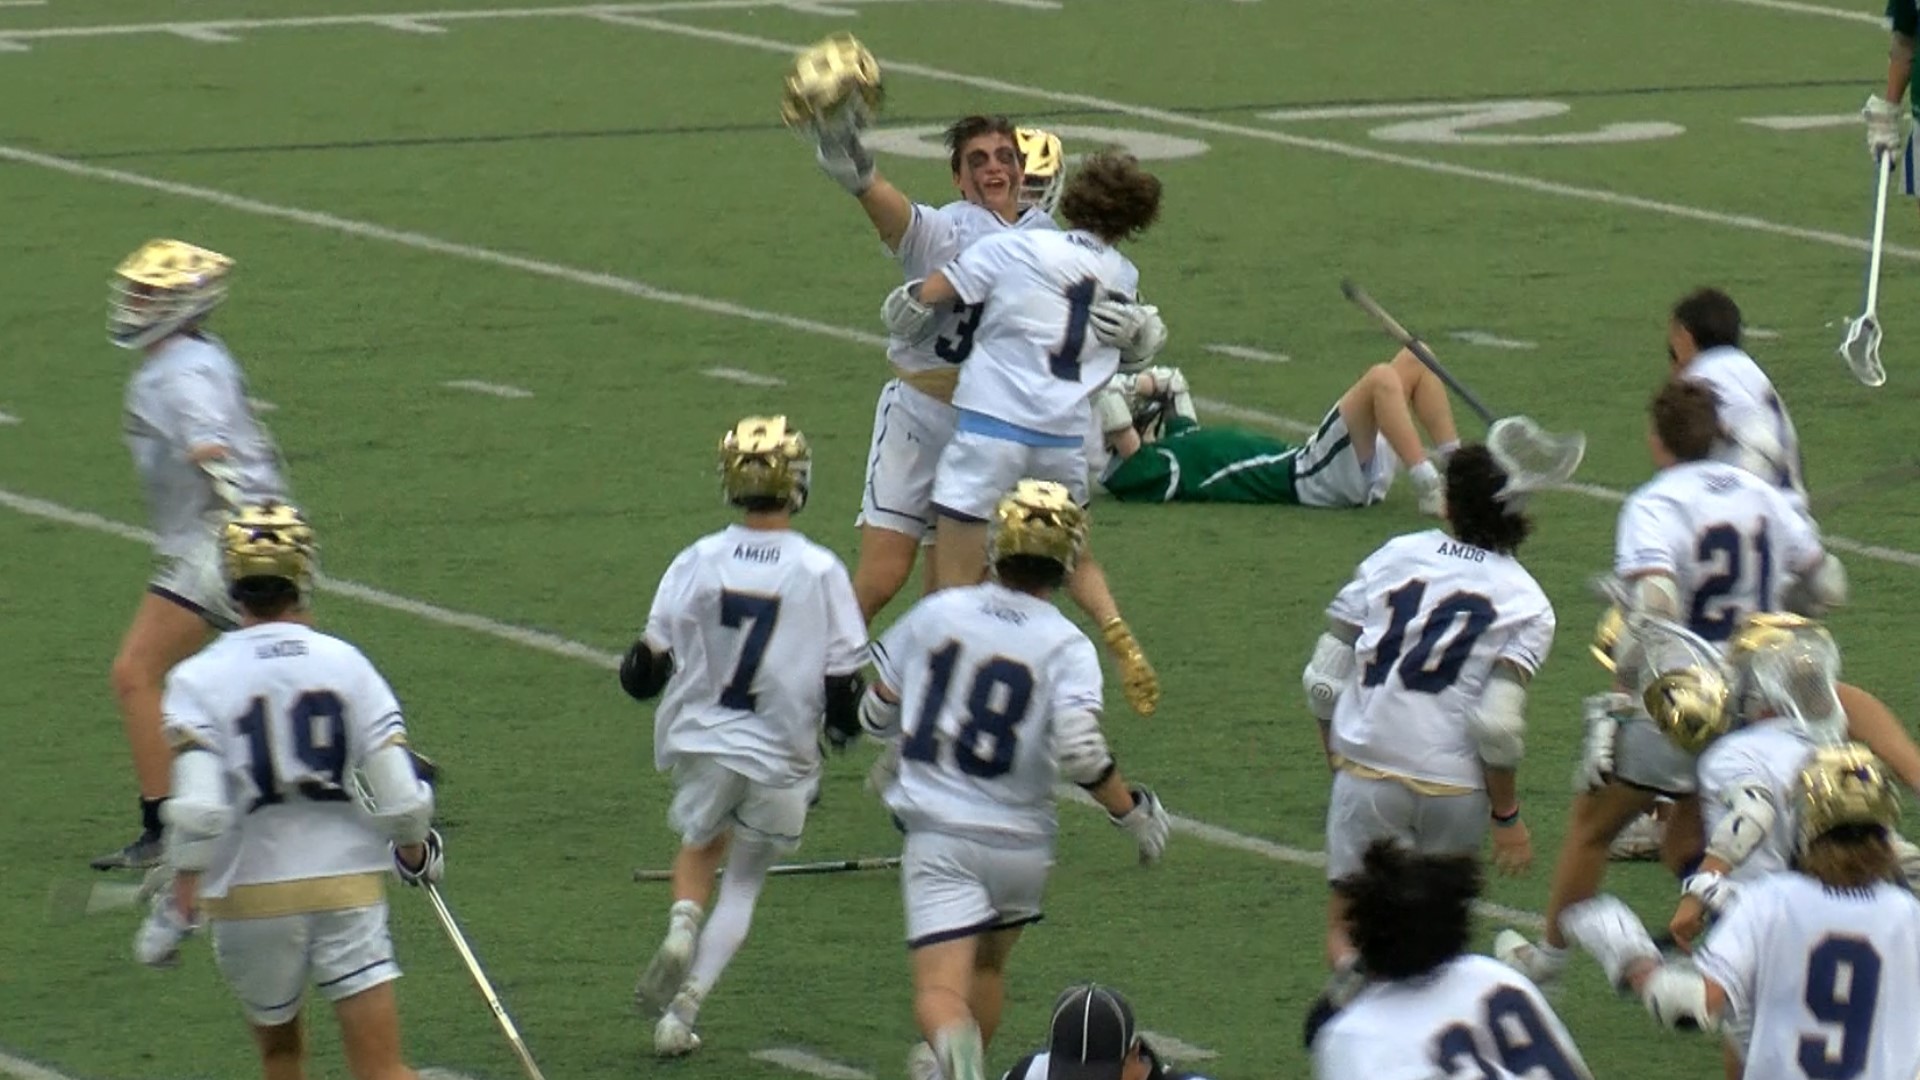 Staten scored the game-winning goal for the Titans lacrosse team in overtime to punch their ticket to the state final four.